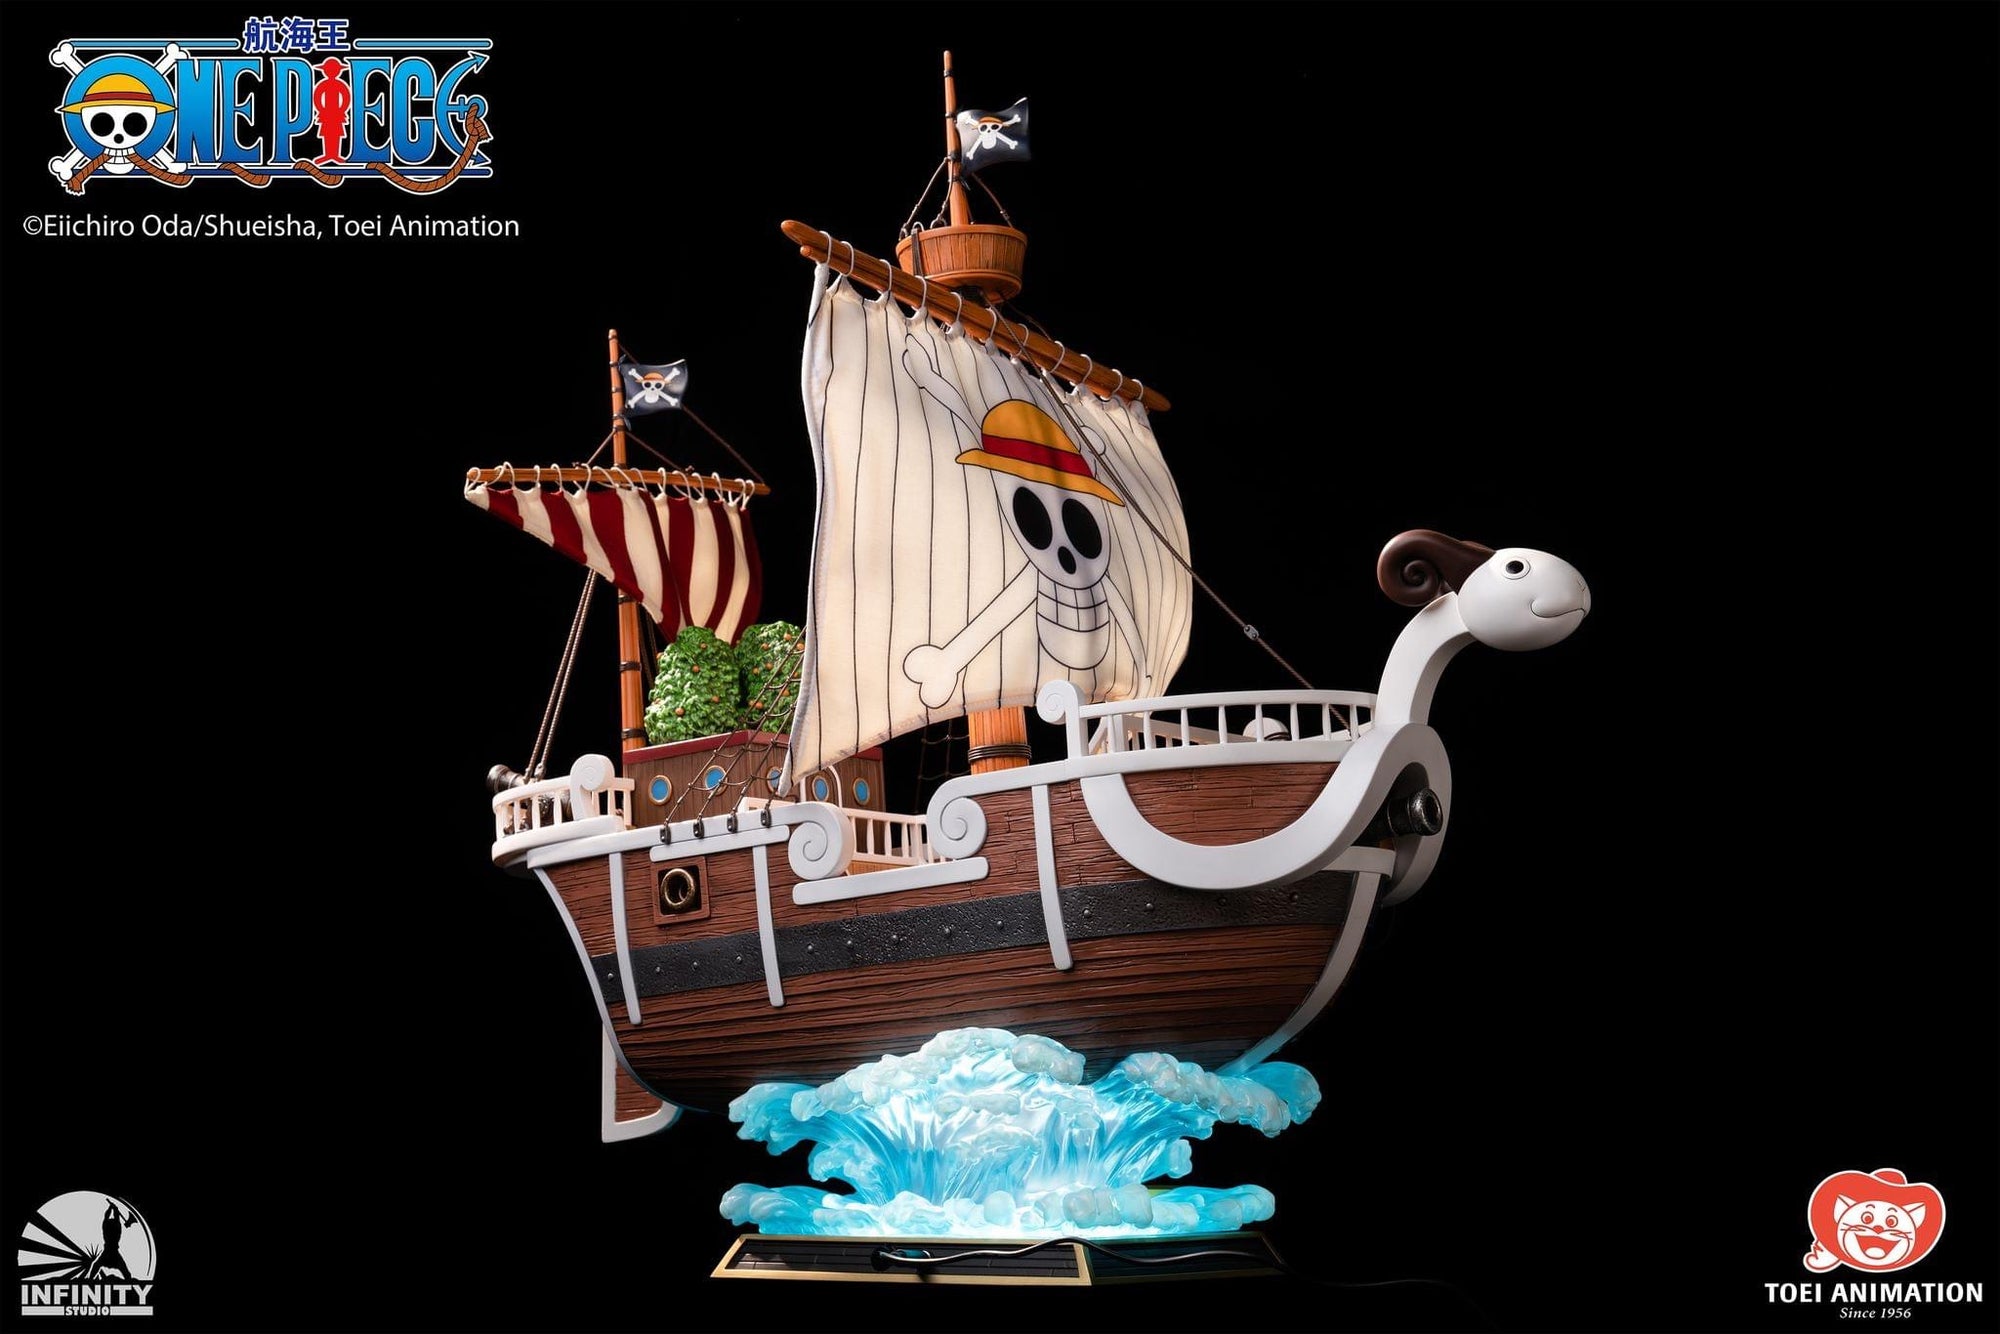 Maquette One Piece - Going Merry 30cm - Bandai Hobby